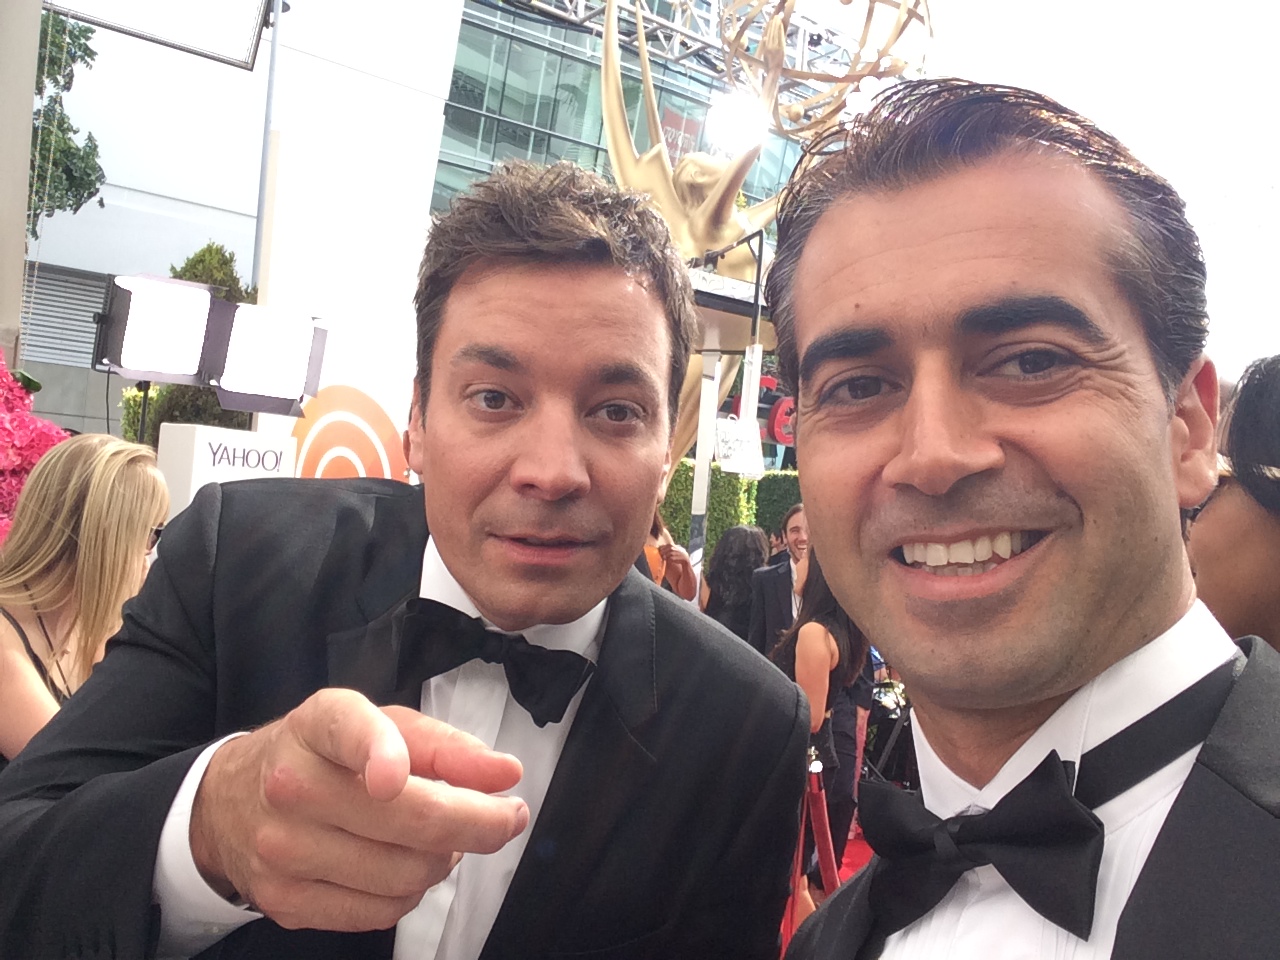 On the Red Carpet at the Primetime Emmys 2014 at the Nokia Center with the one and only Jimmy Fallon